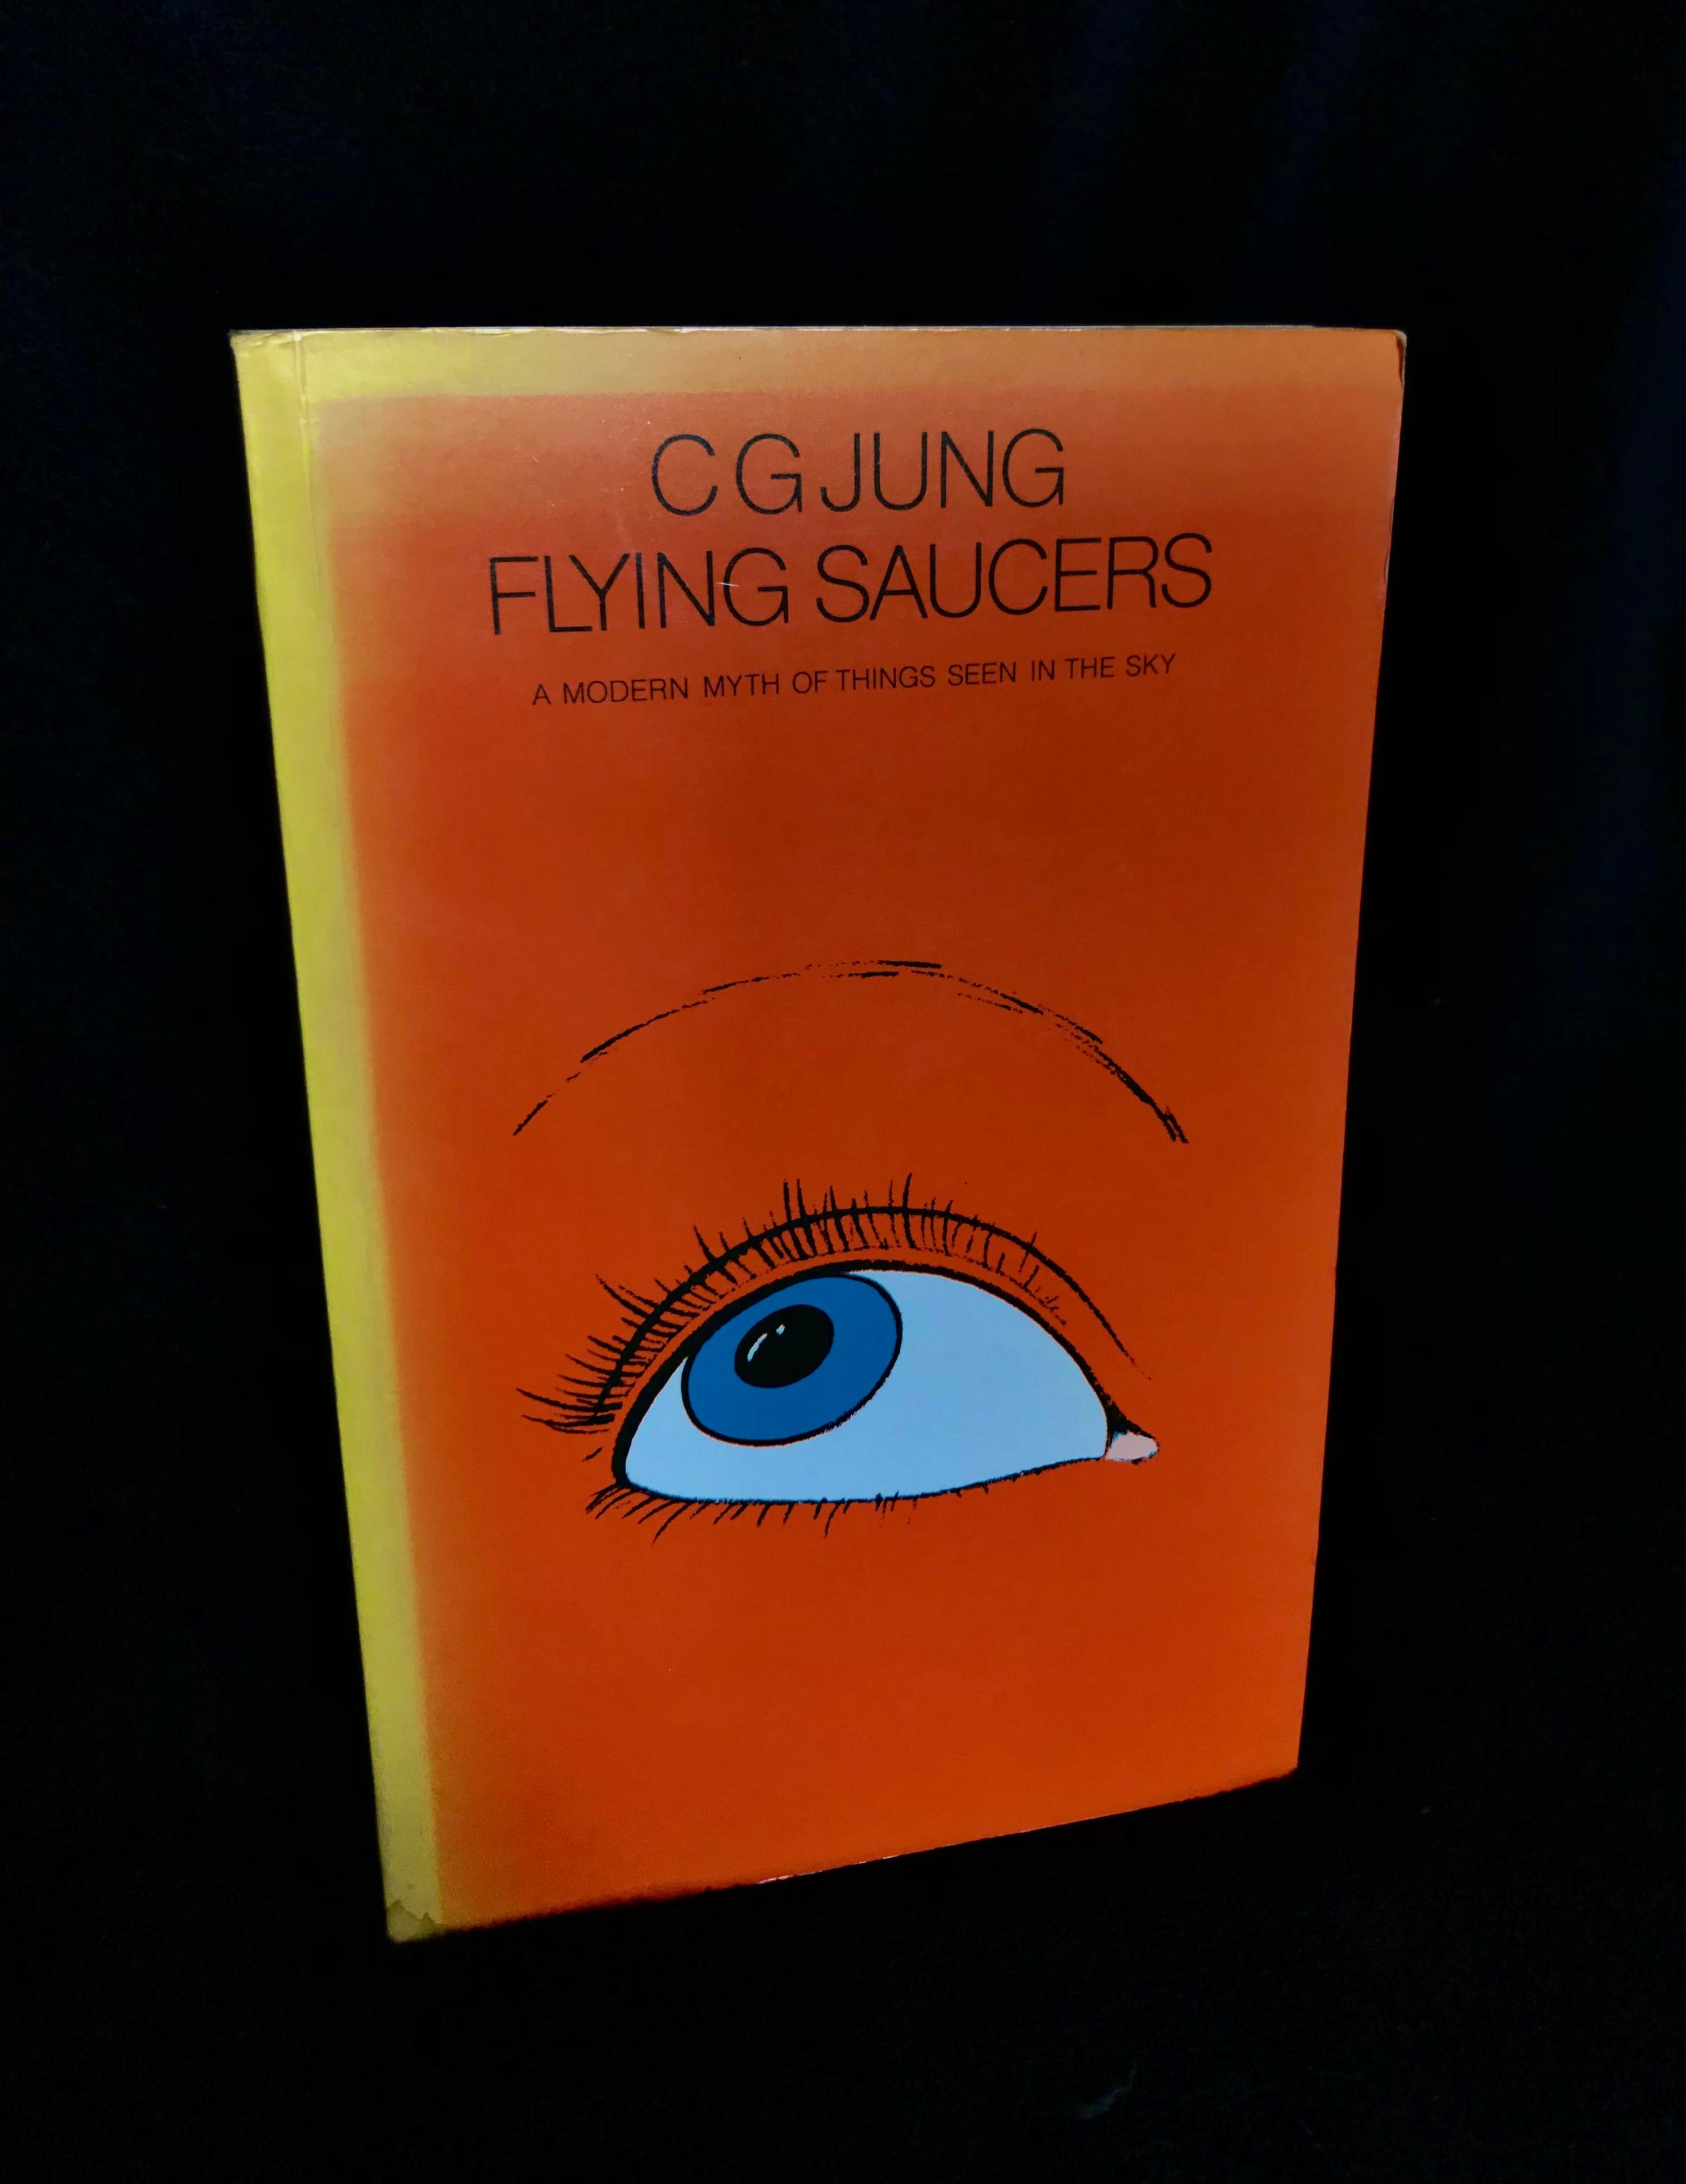 Flying Saucers: A Modern Myth Of Things Seen In The Sky by C. G. Jung